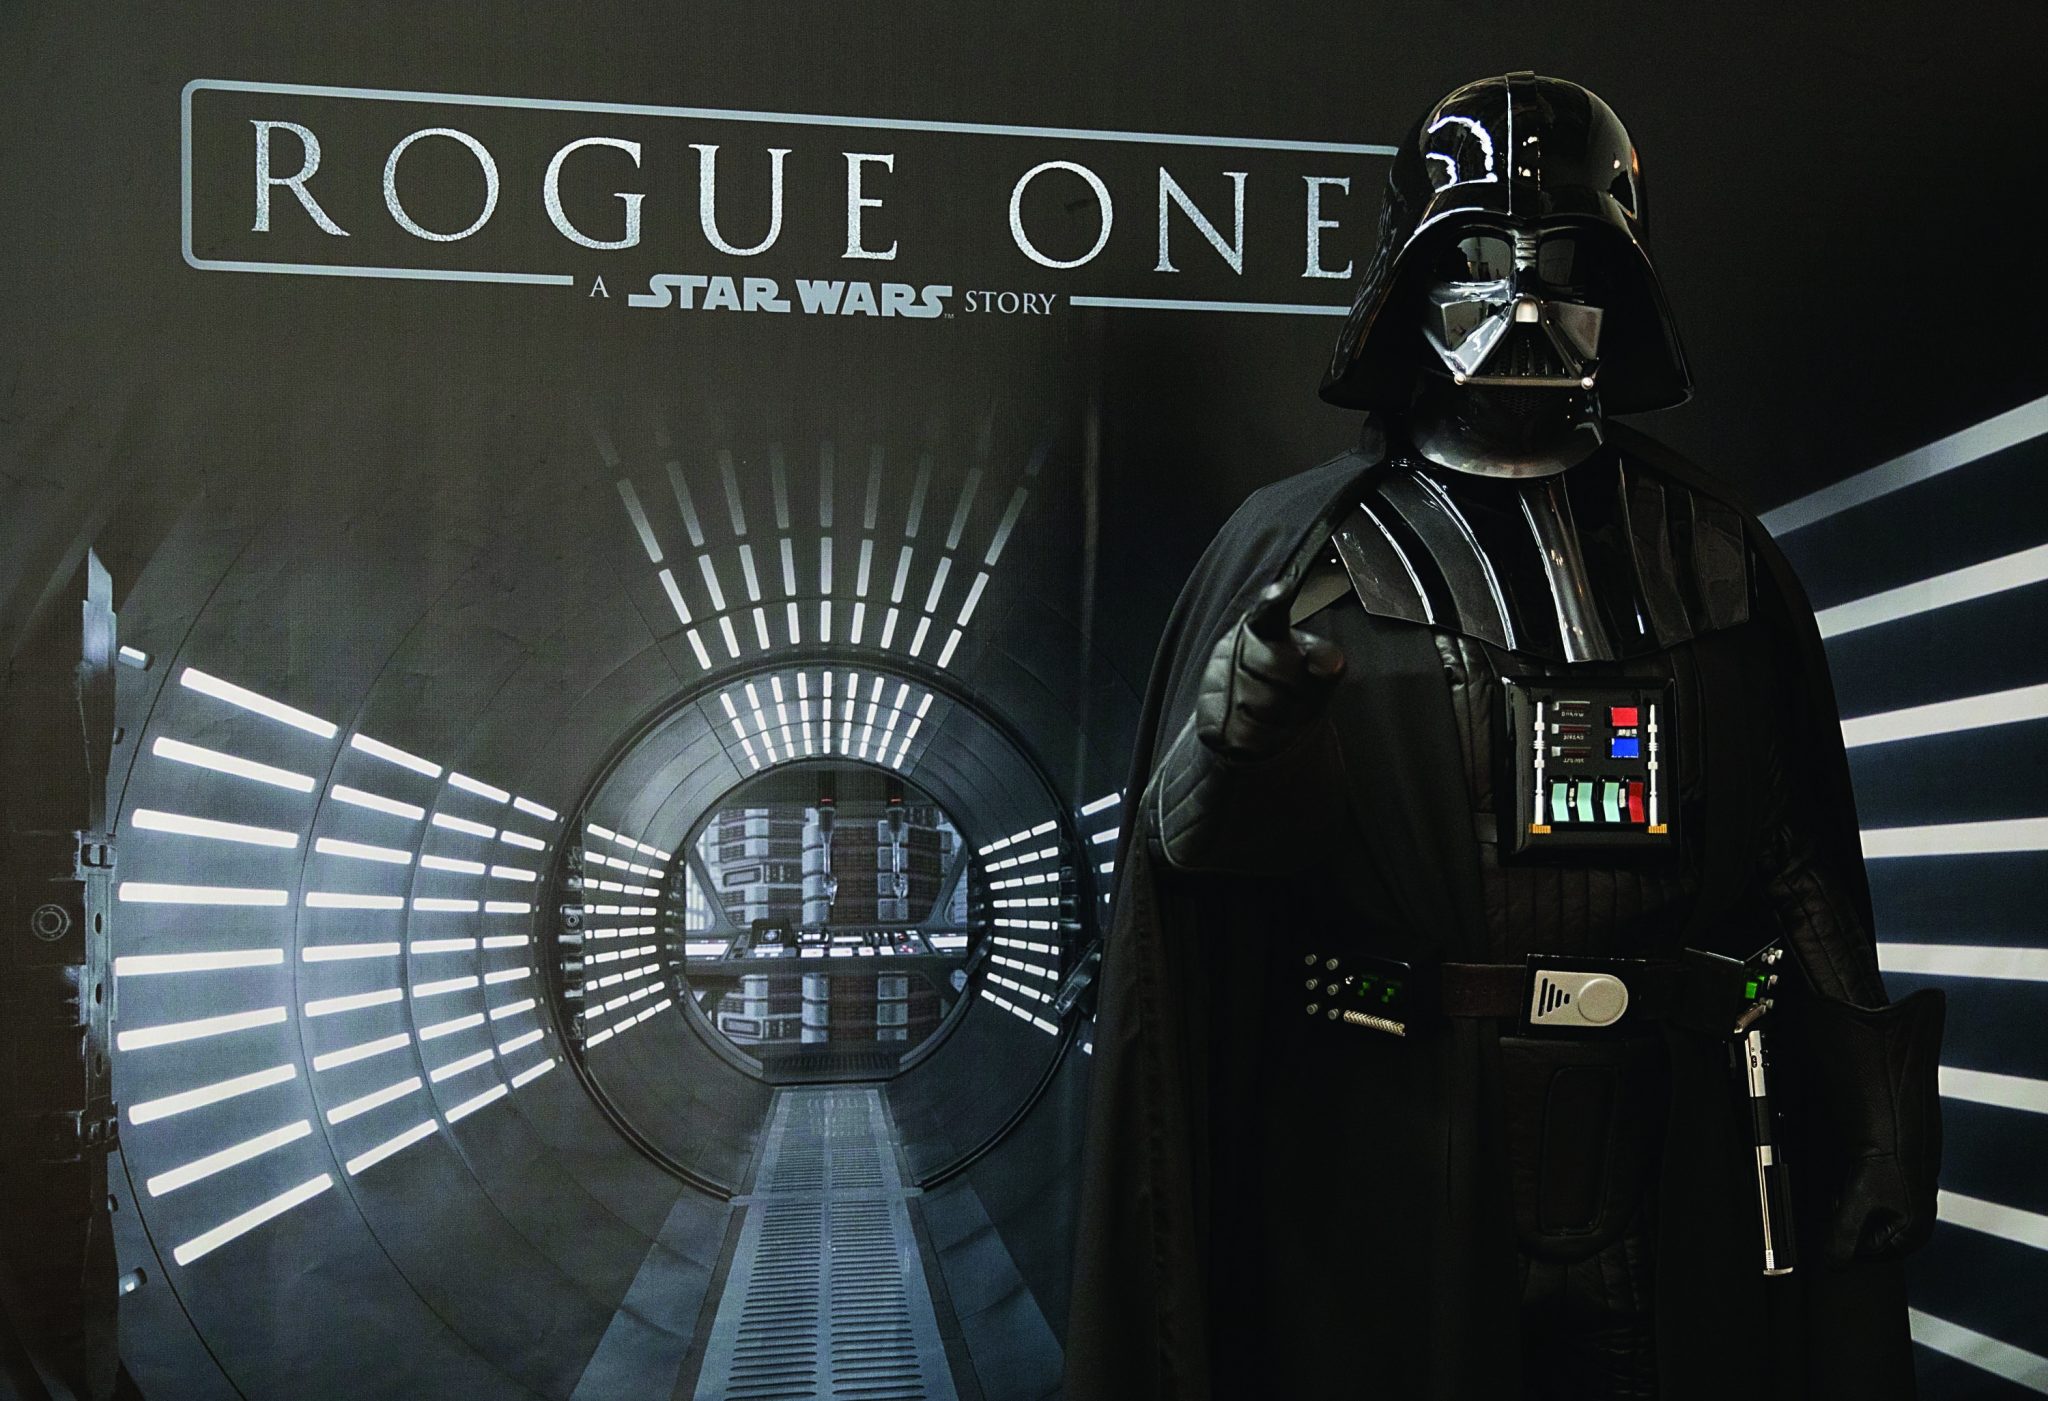 Fans of Rogue One: A Star Wars Story at SXSW Can Join the Rebellion with the Escape From Scarif Unique Photo Opportunity March 10-12